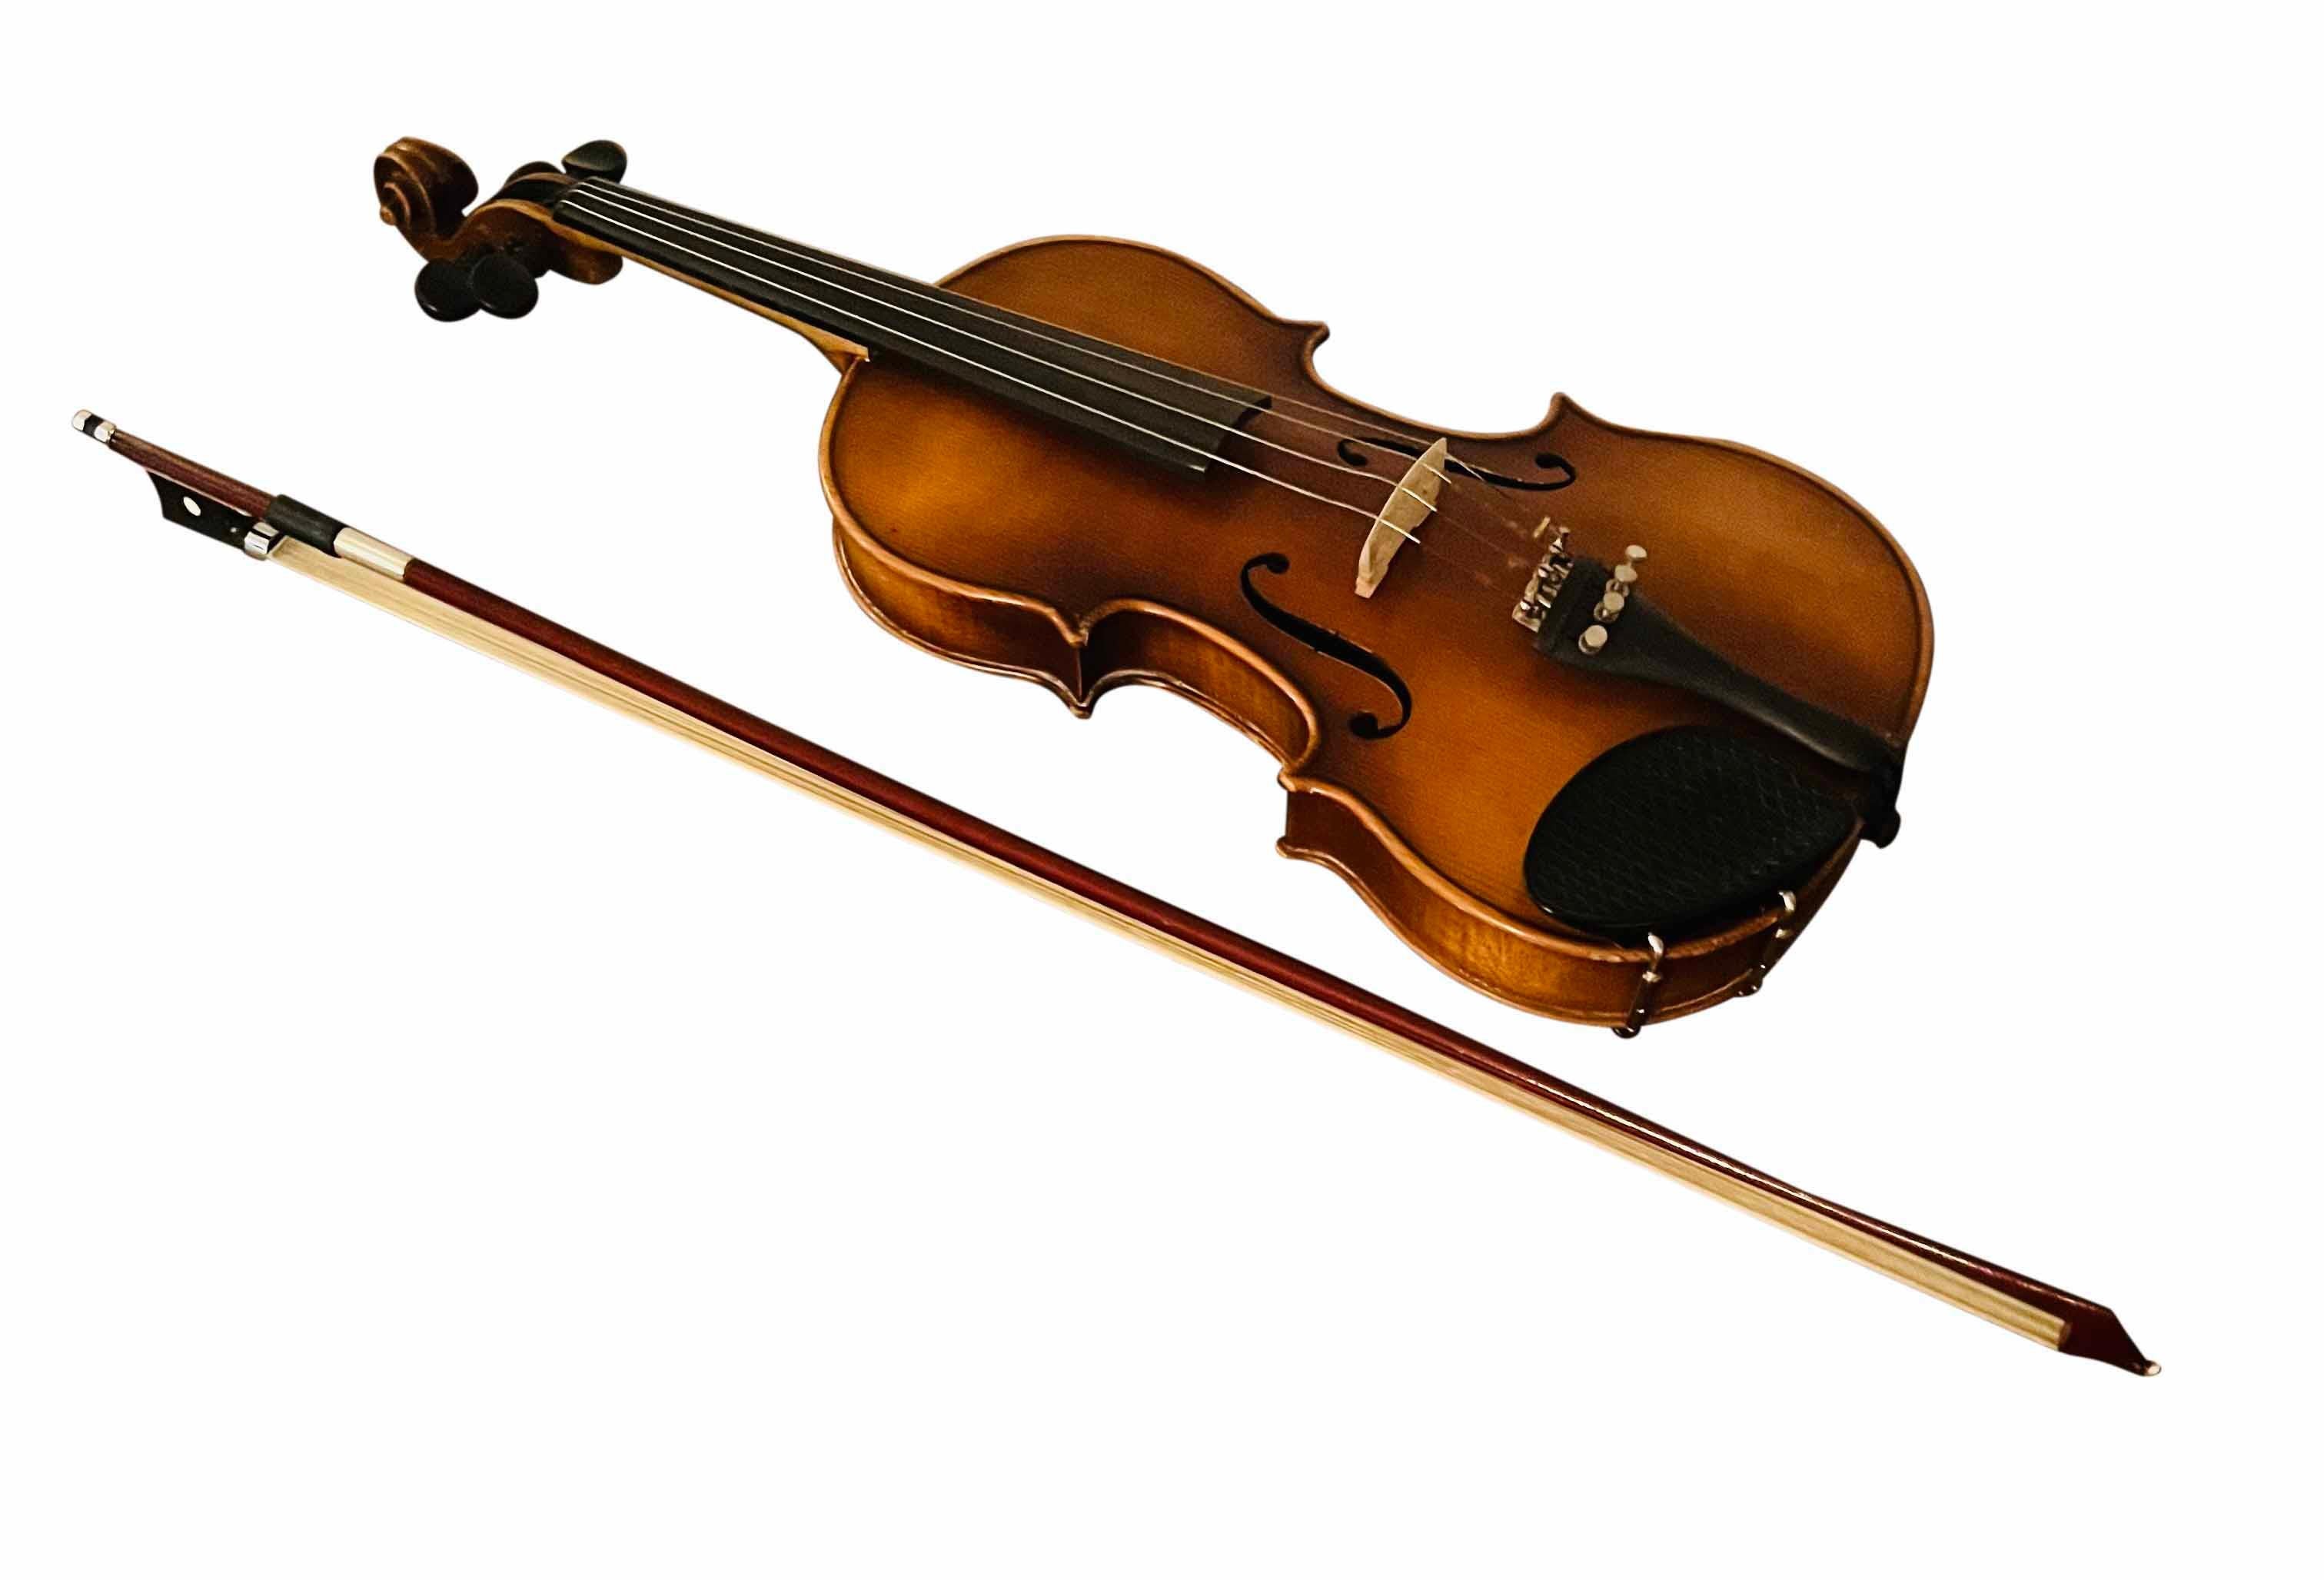 1970 3/4 E.R. Pfretzschner Hand-Crafted Violin in the Style of A. Stradivarius en vente 12